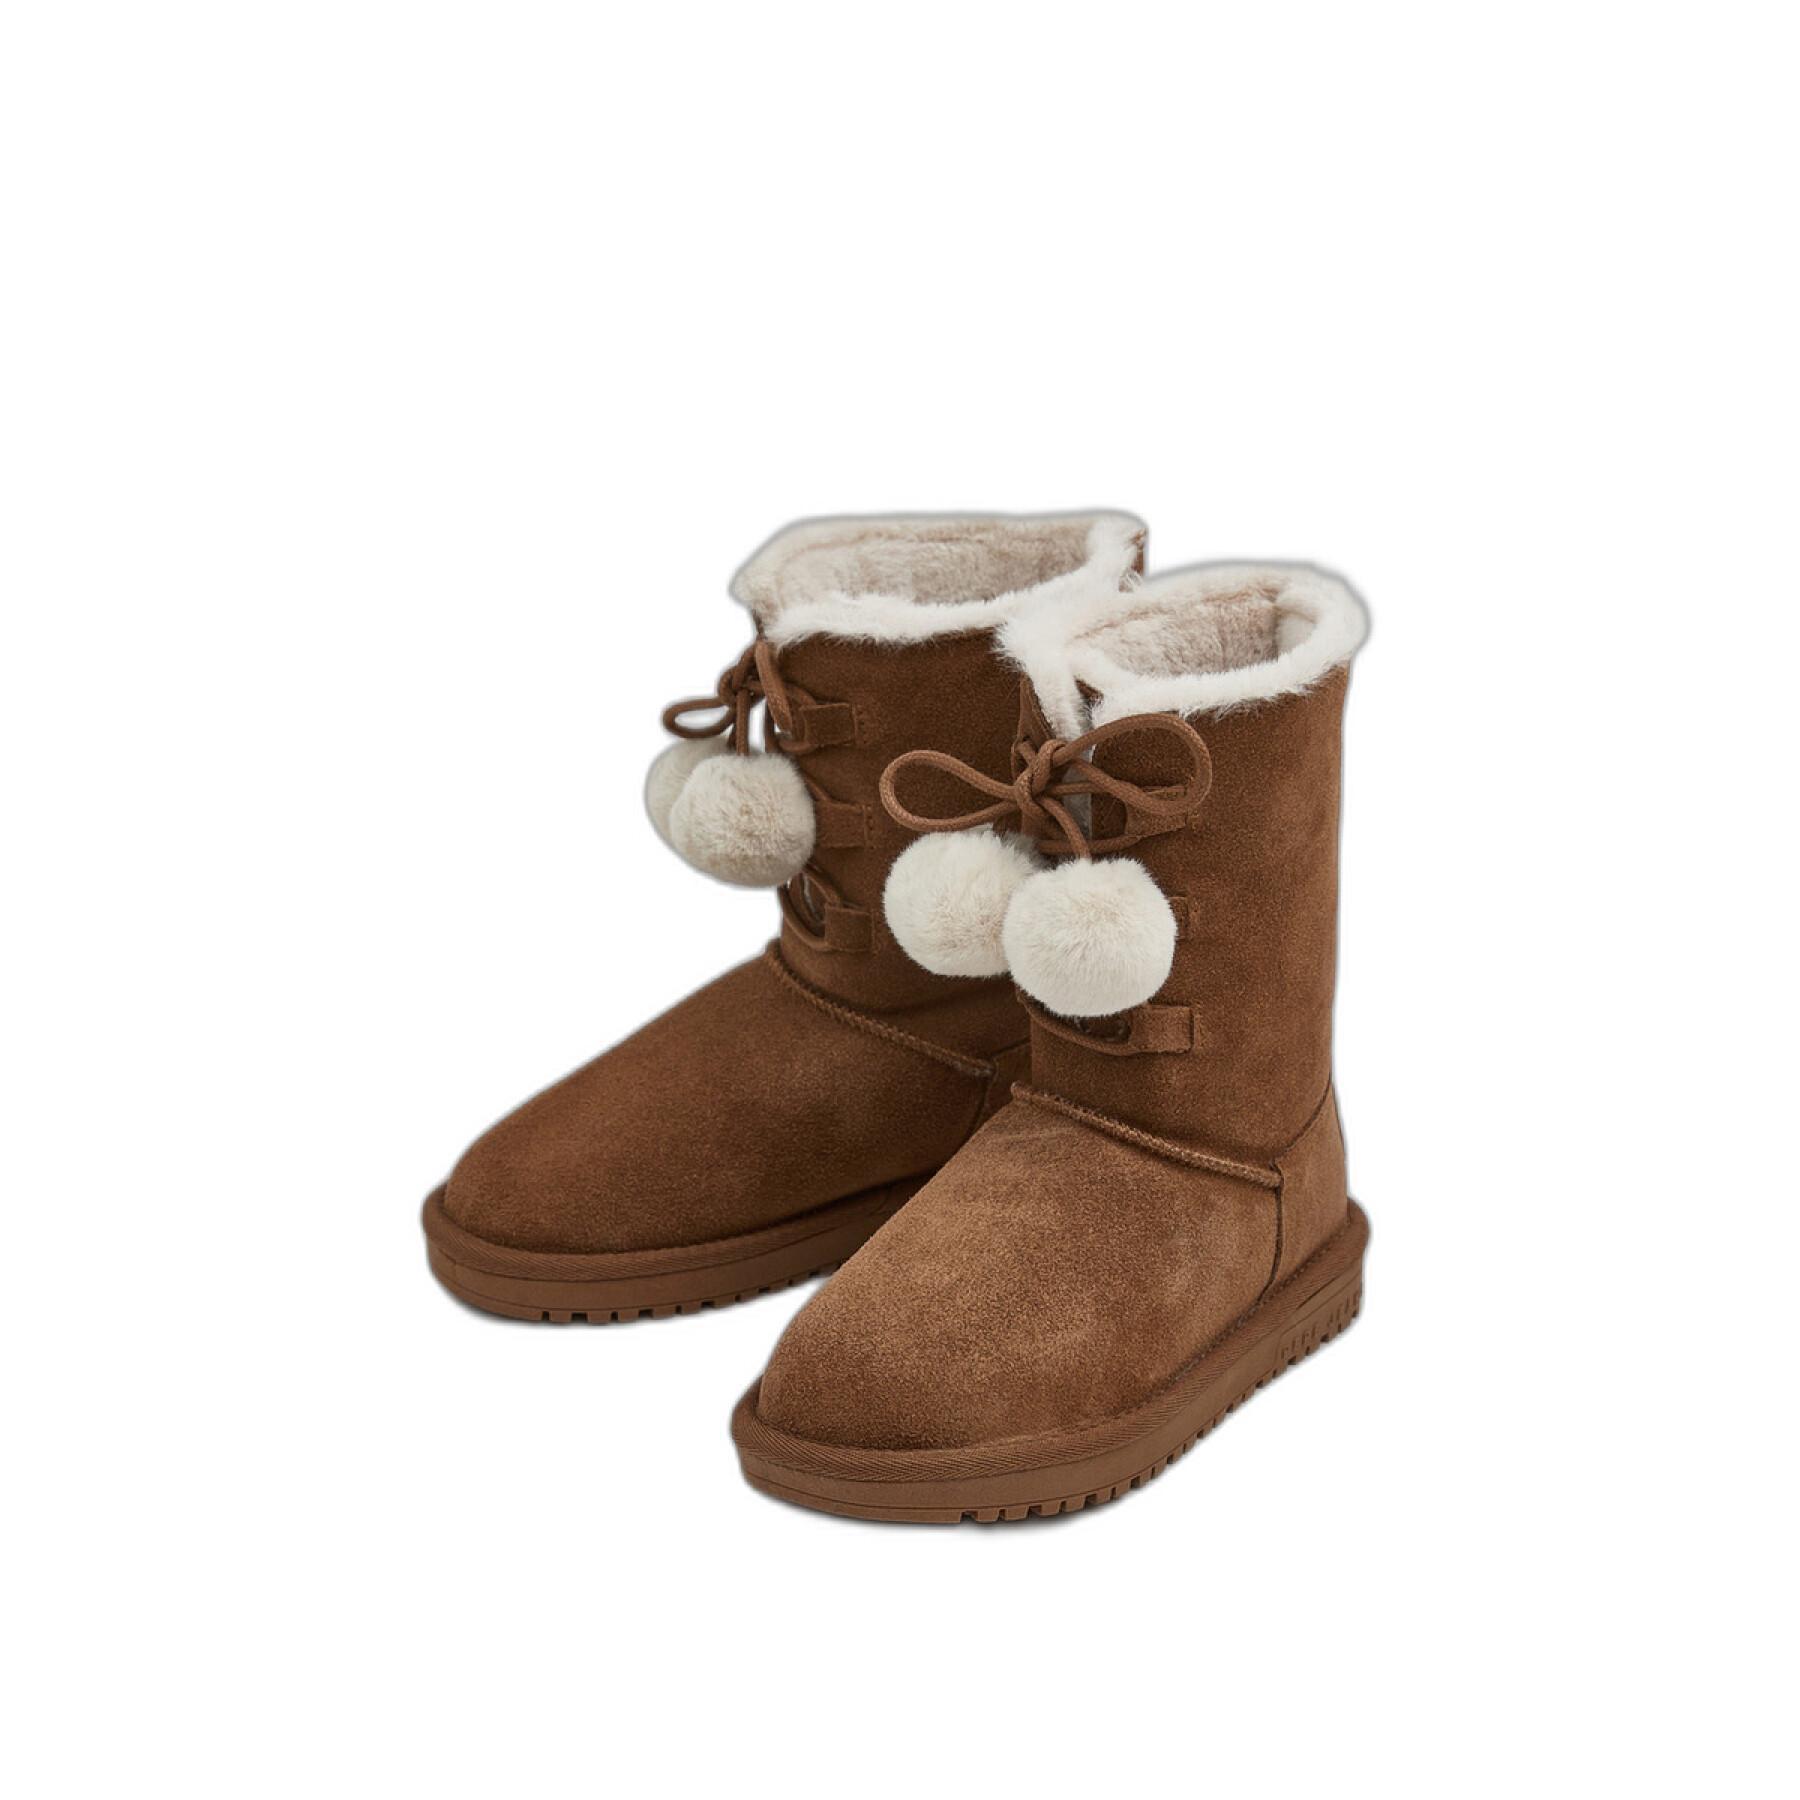 Girl's boots Pepe Jeans Diss Tassel